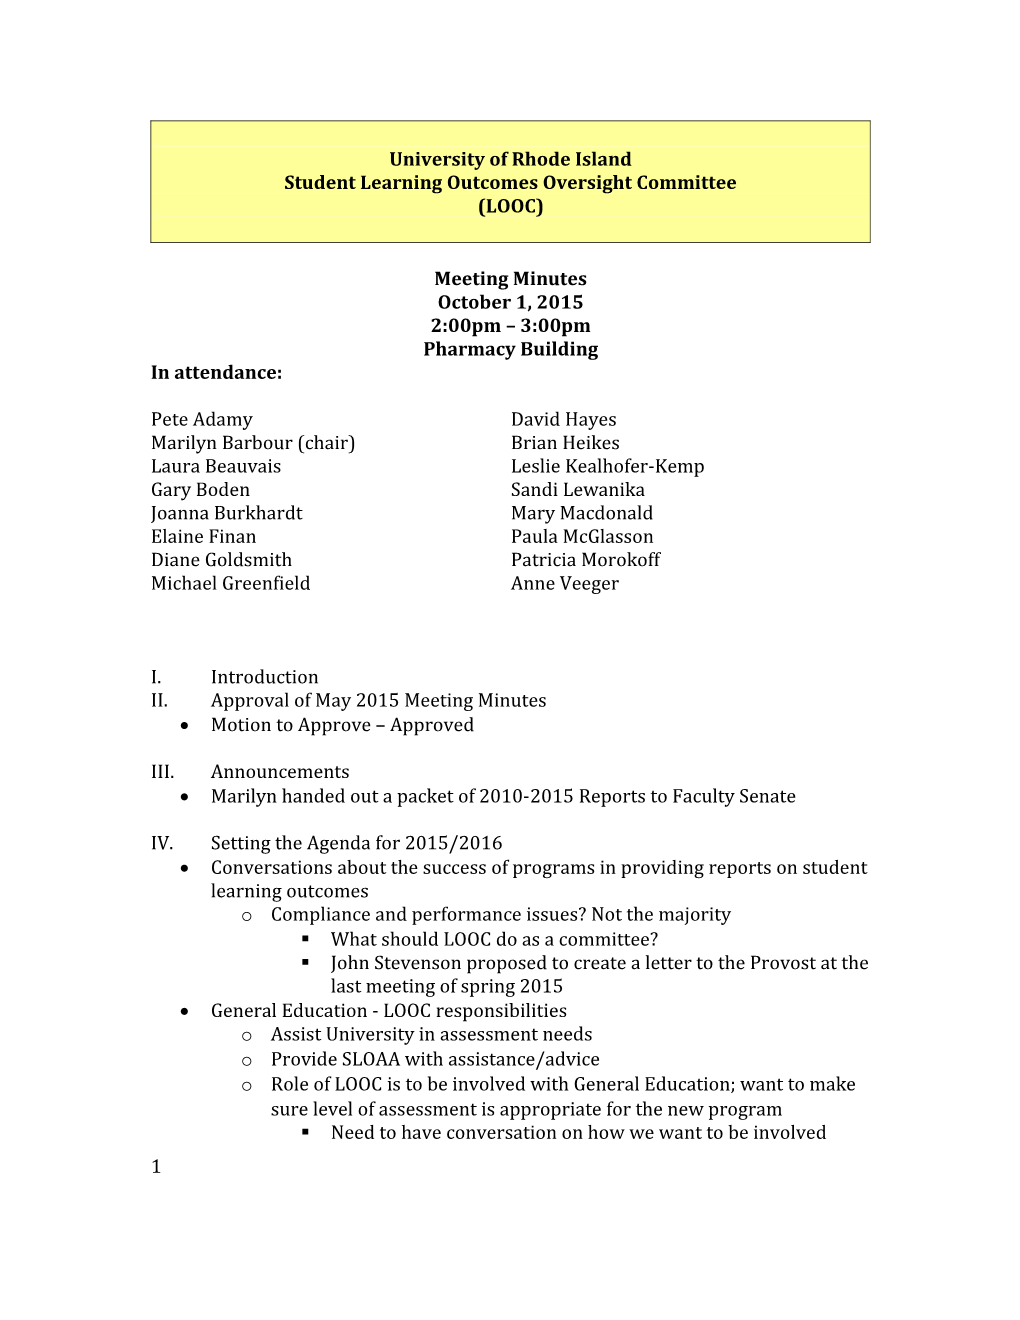 Student Learning Outcomes Oversight Committee